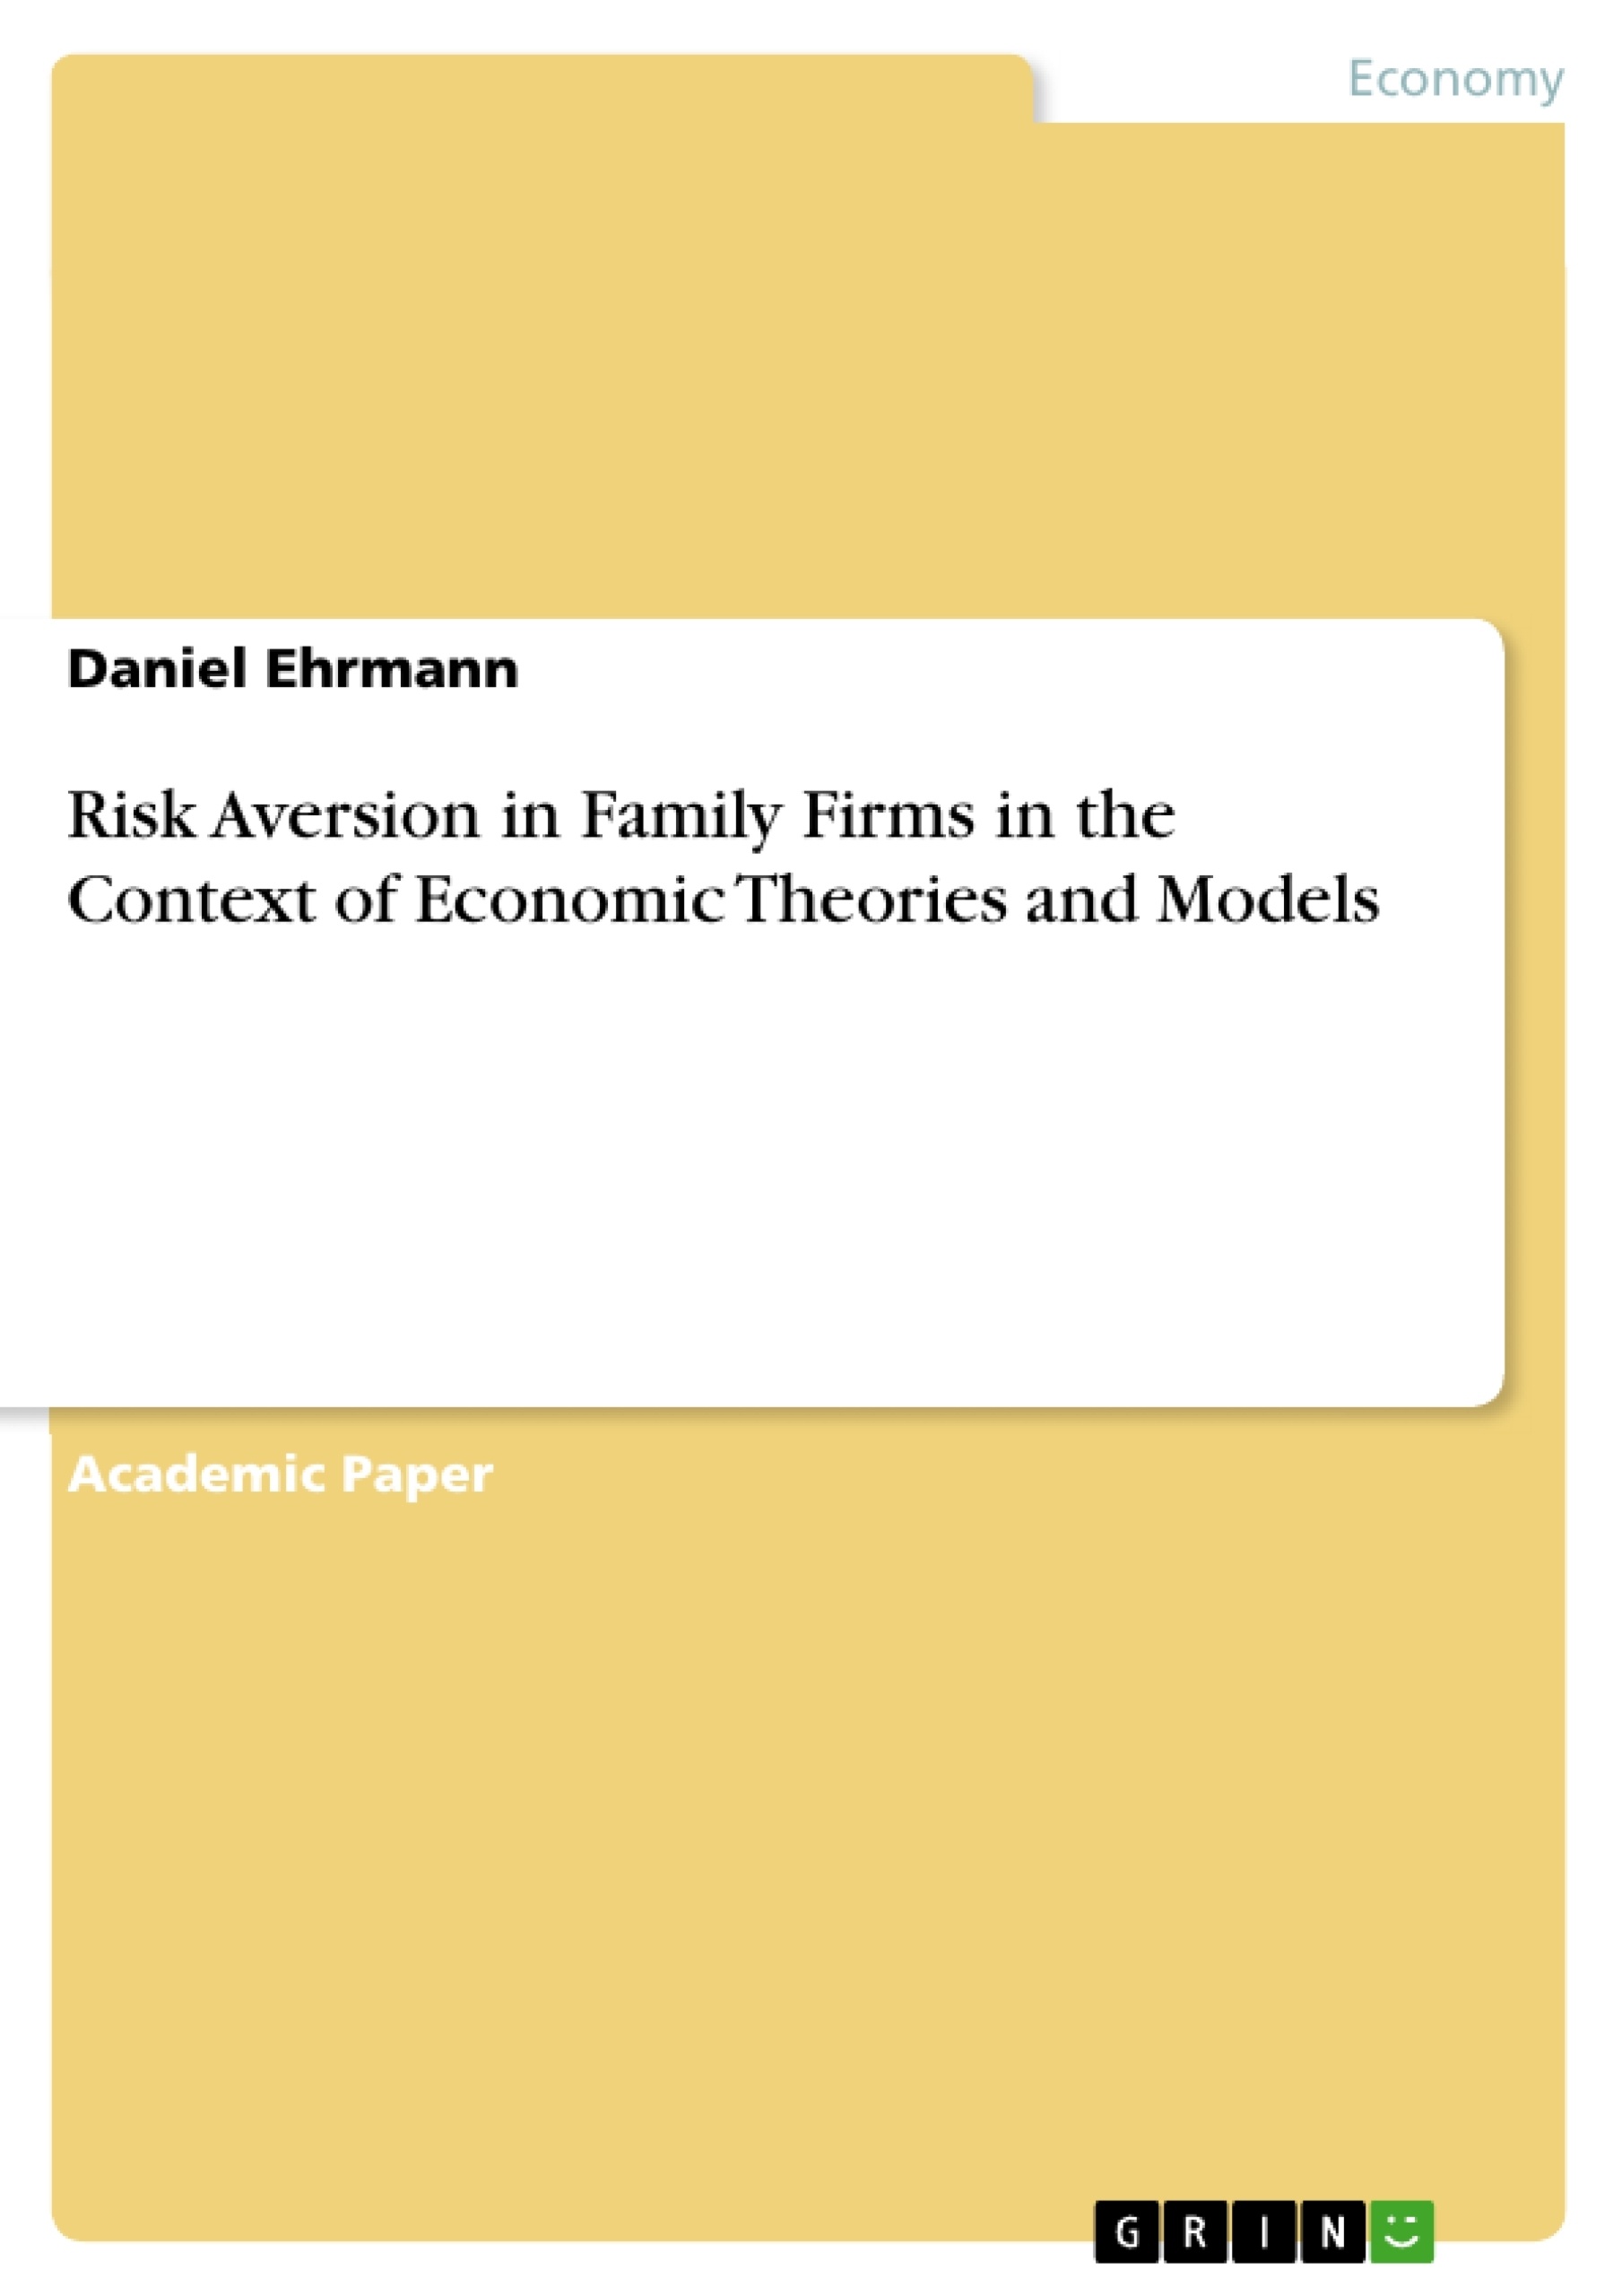 Titel: Risk Aversion in Family Firms in the Context of Economic Theories and Models